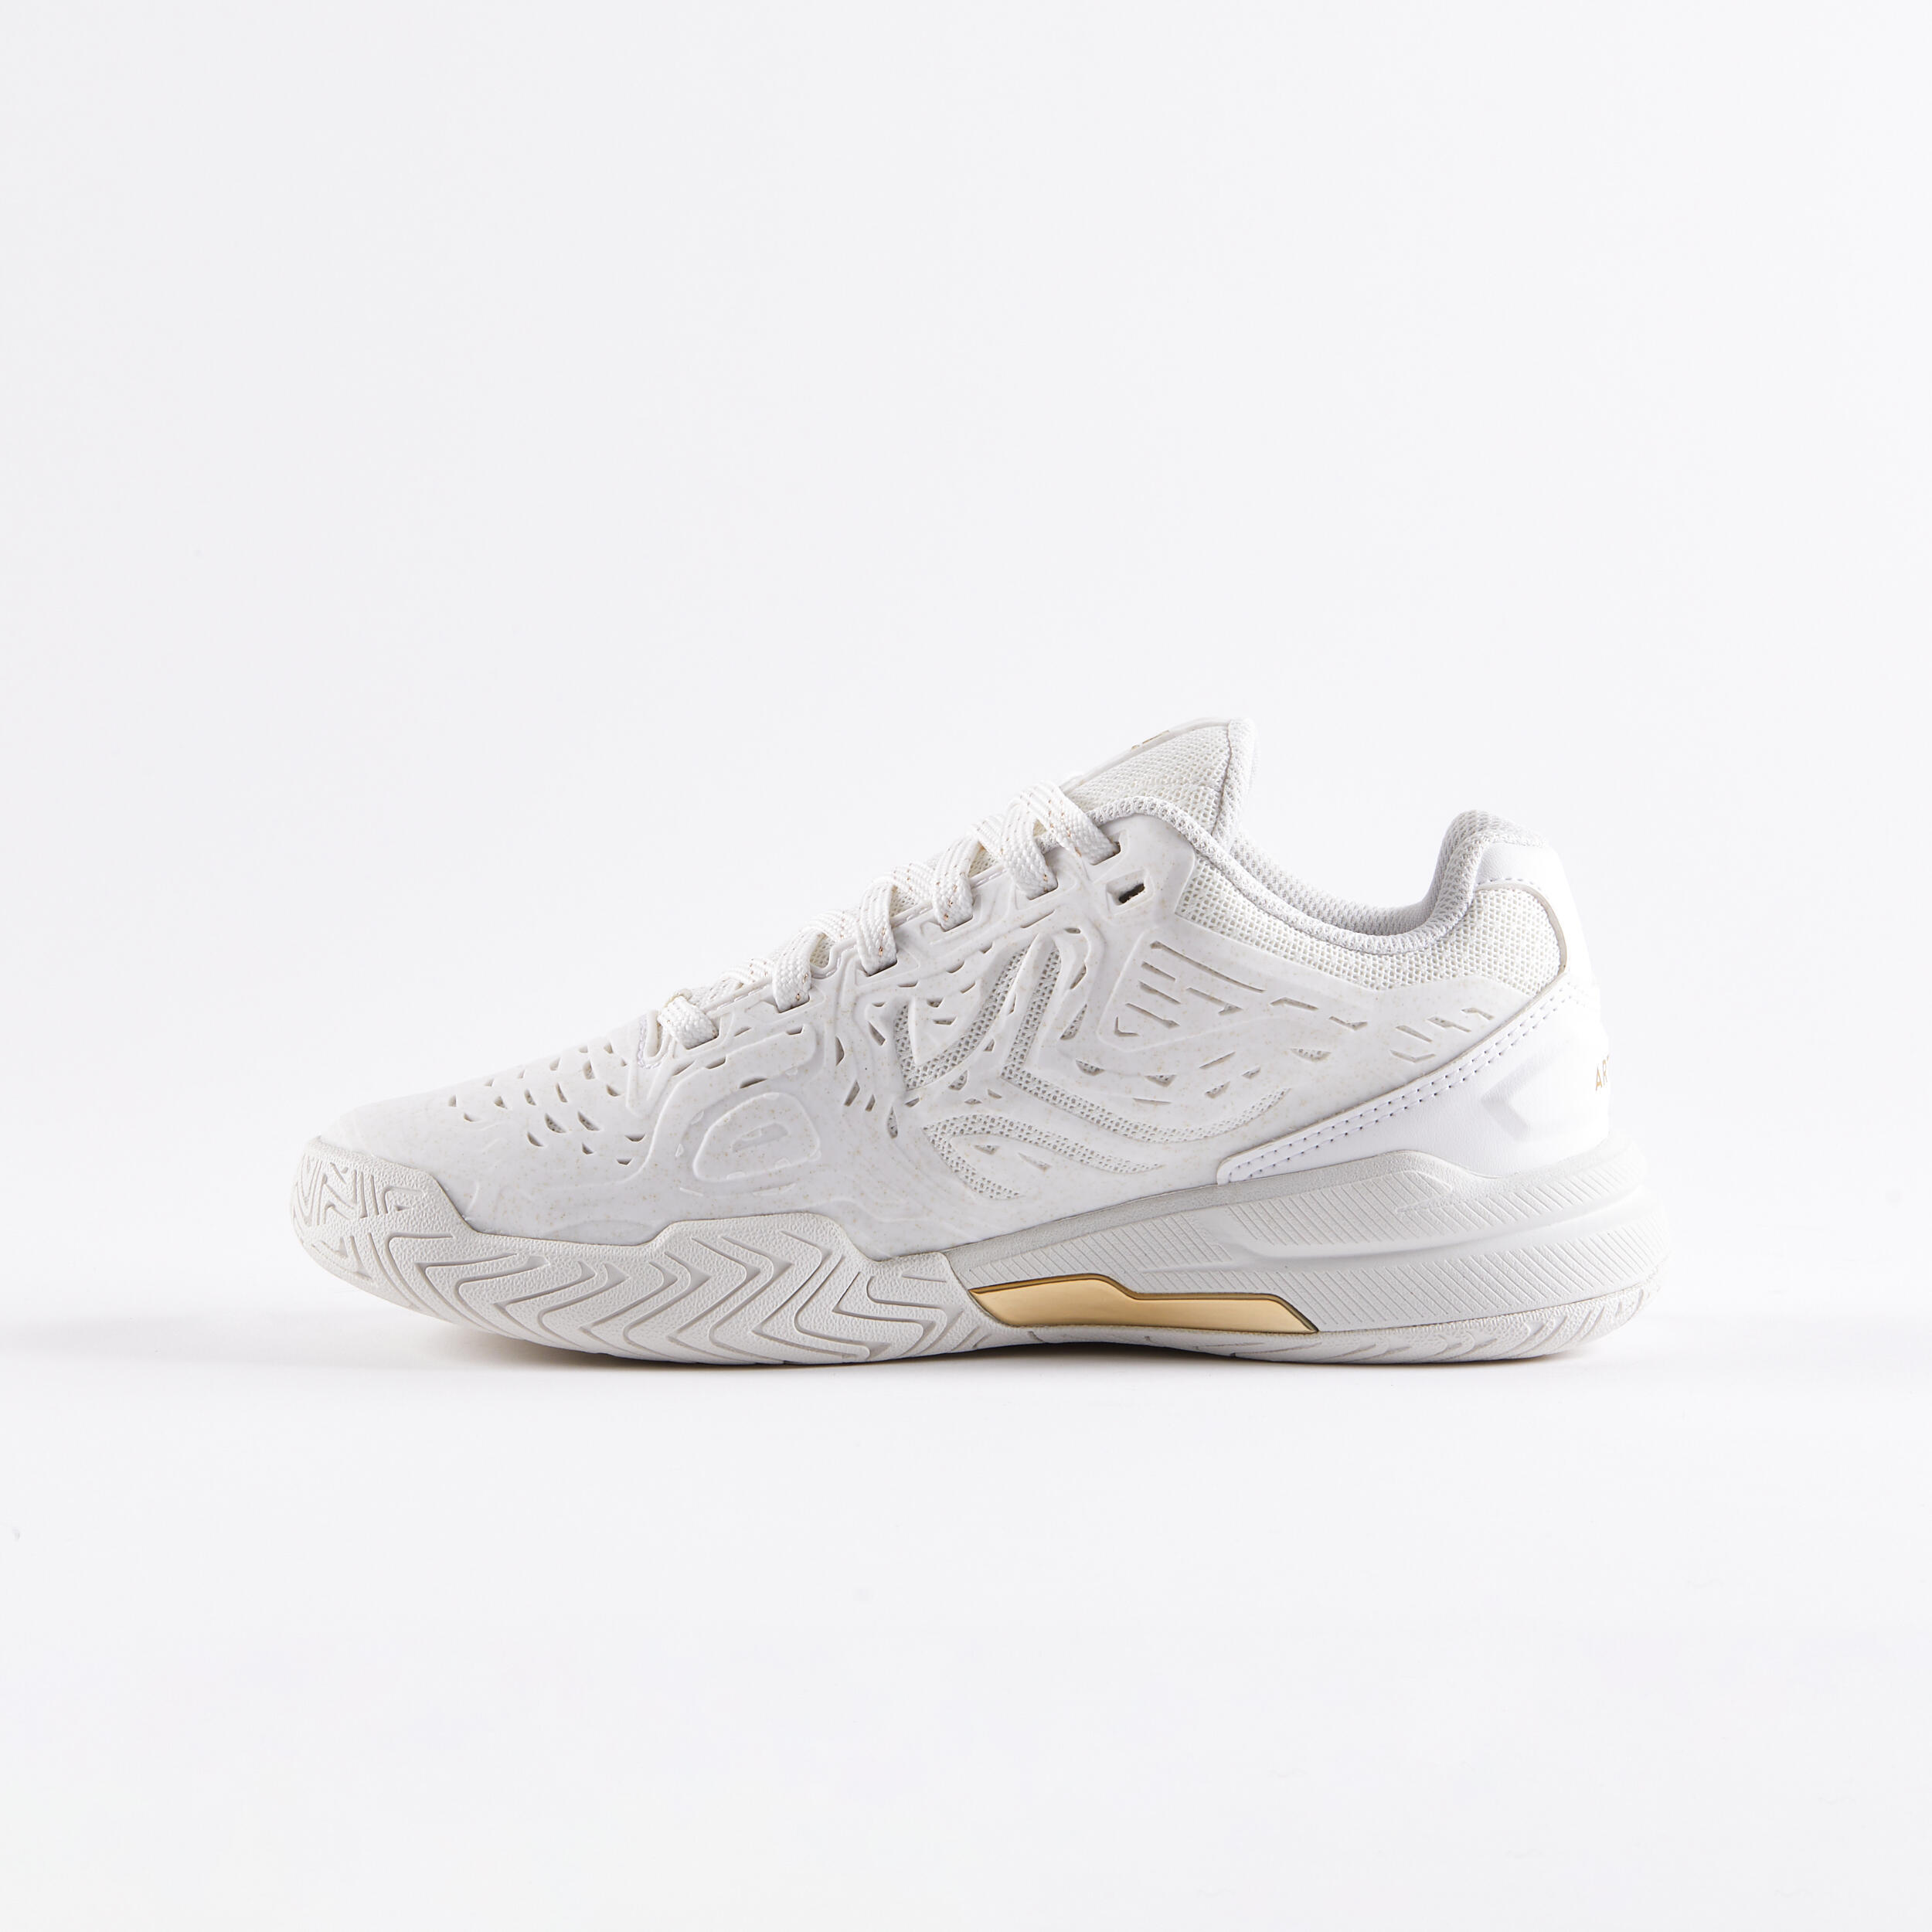 Women's Multi-Court Tennis Shoe Strong - Off-White/Gold 2/7